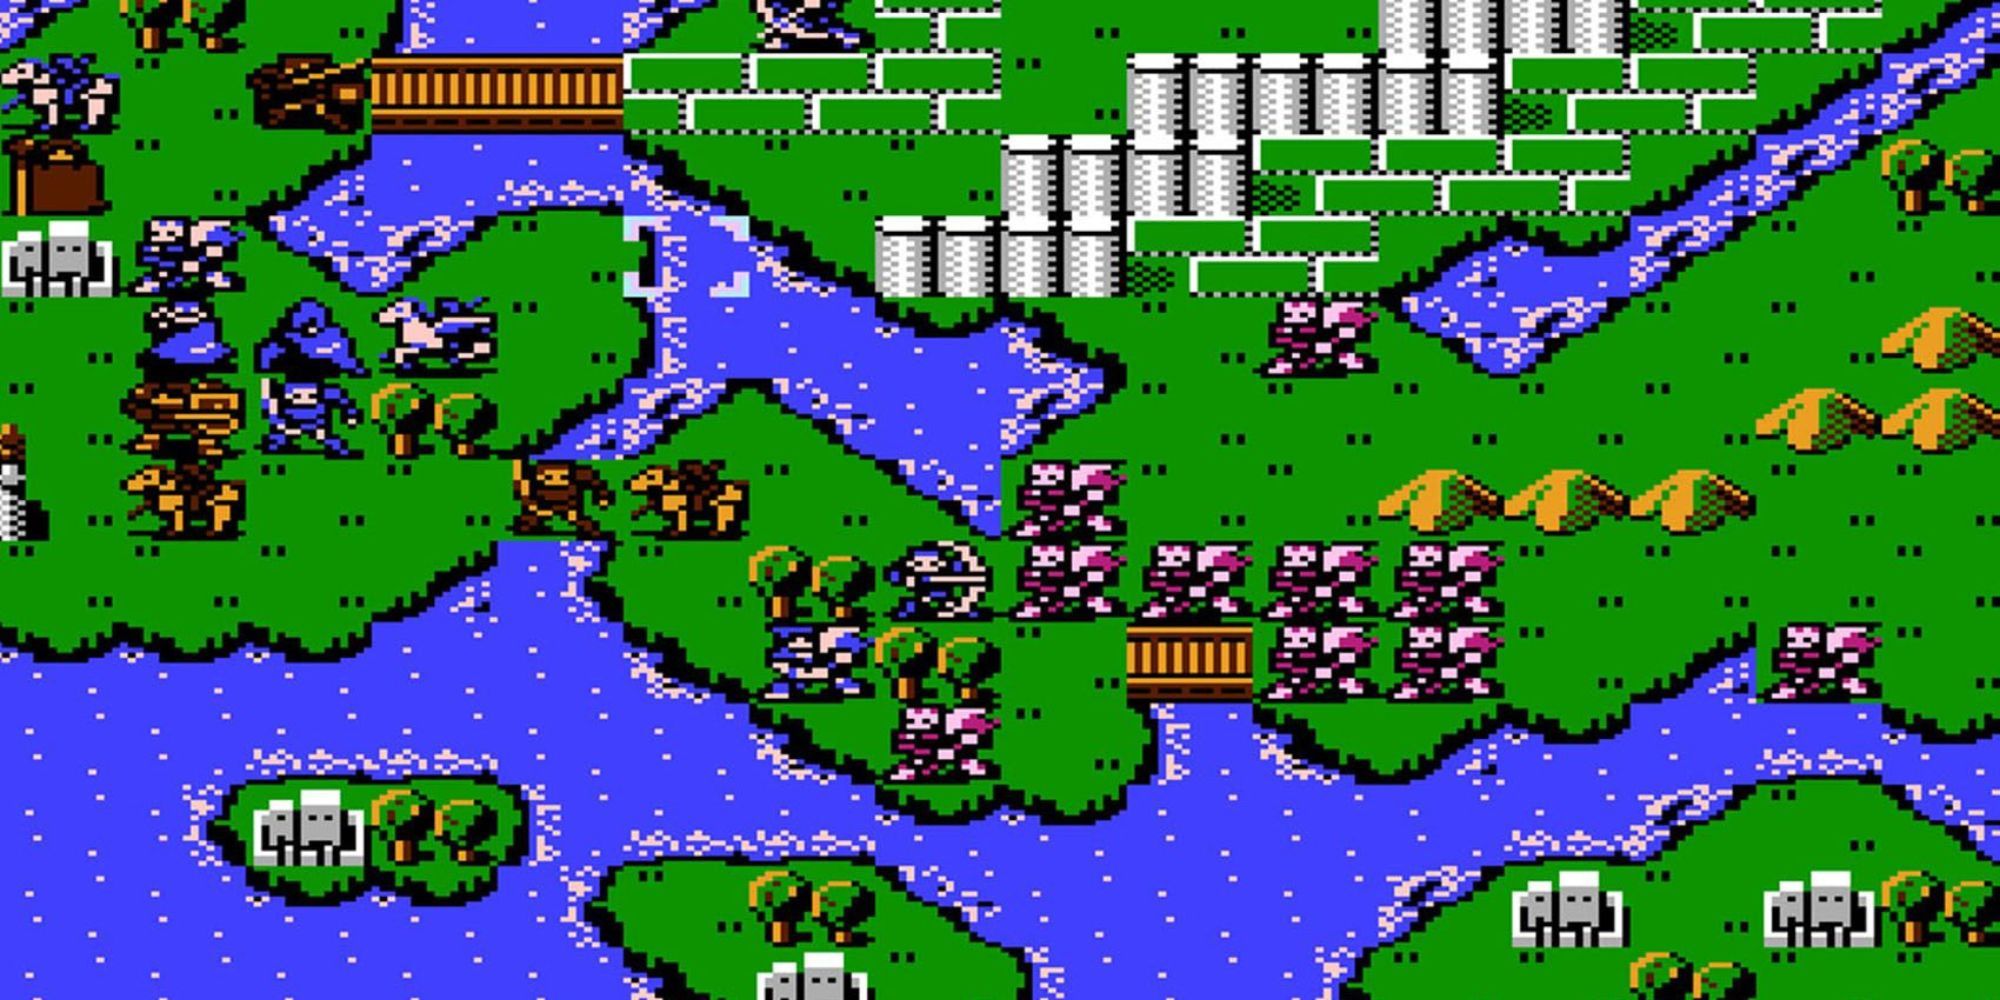 Units fight each other on a map surrounded by water in Fire Emblem Shadow Dragon & The Blade of Light.